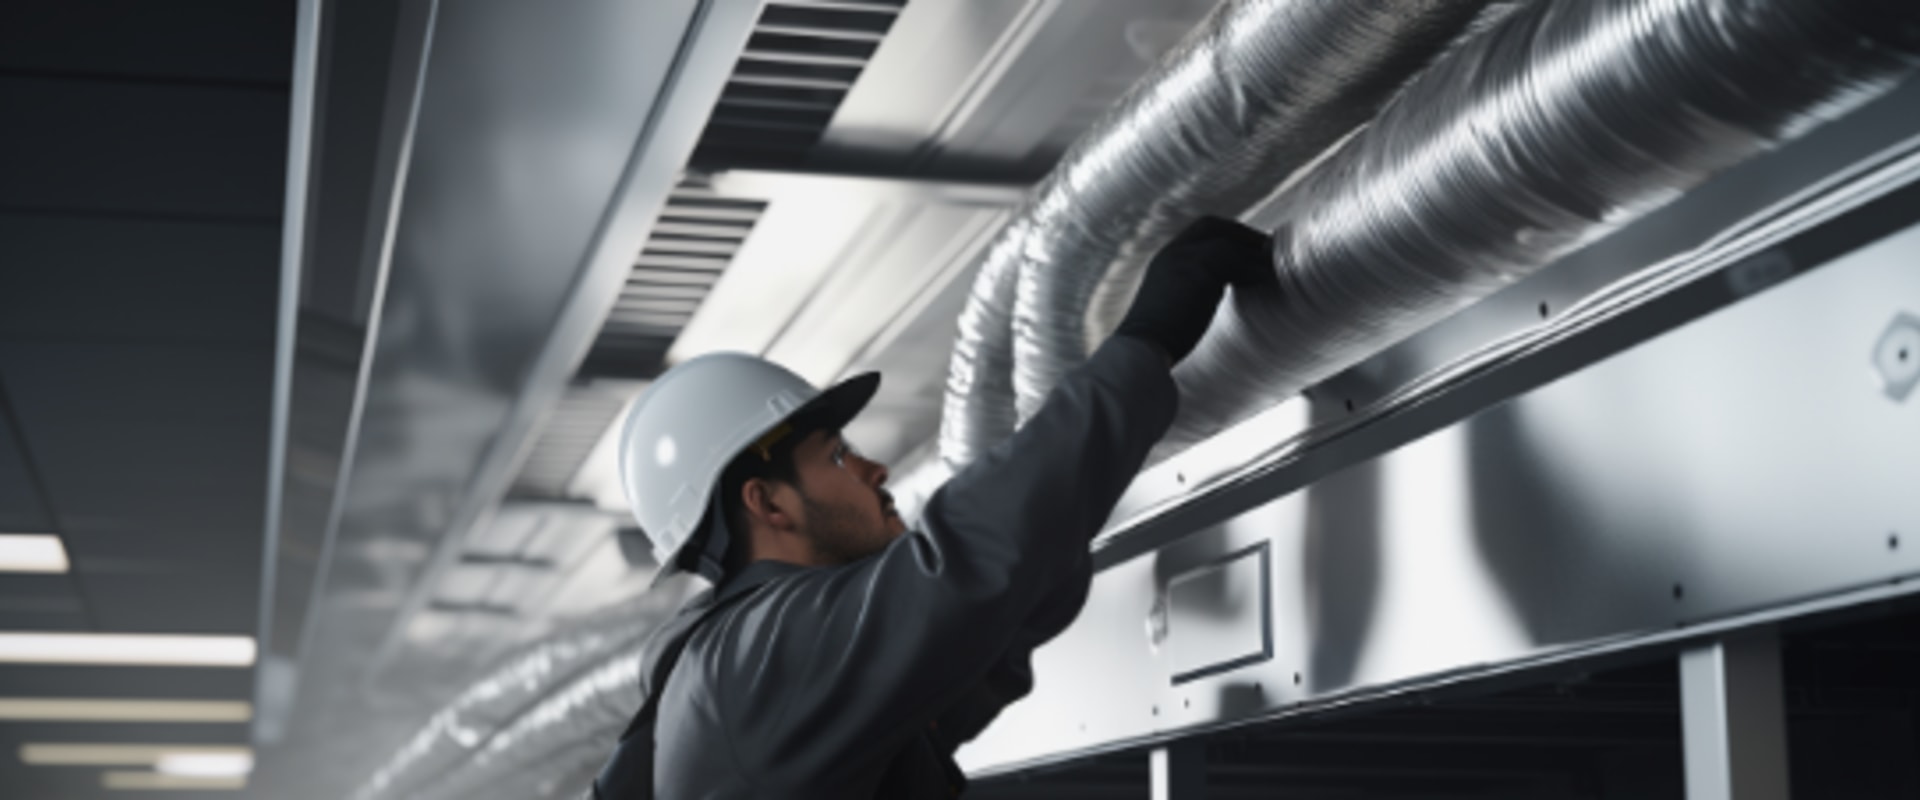 Improve Air Quality With Duct Sealing Service in Fort Pierce FL